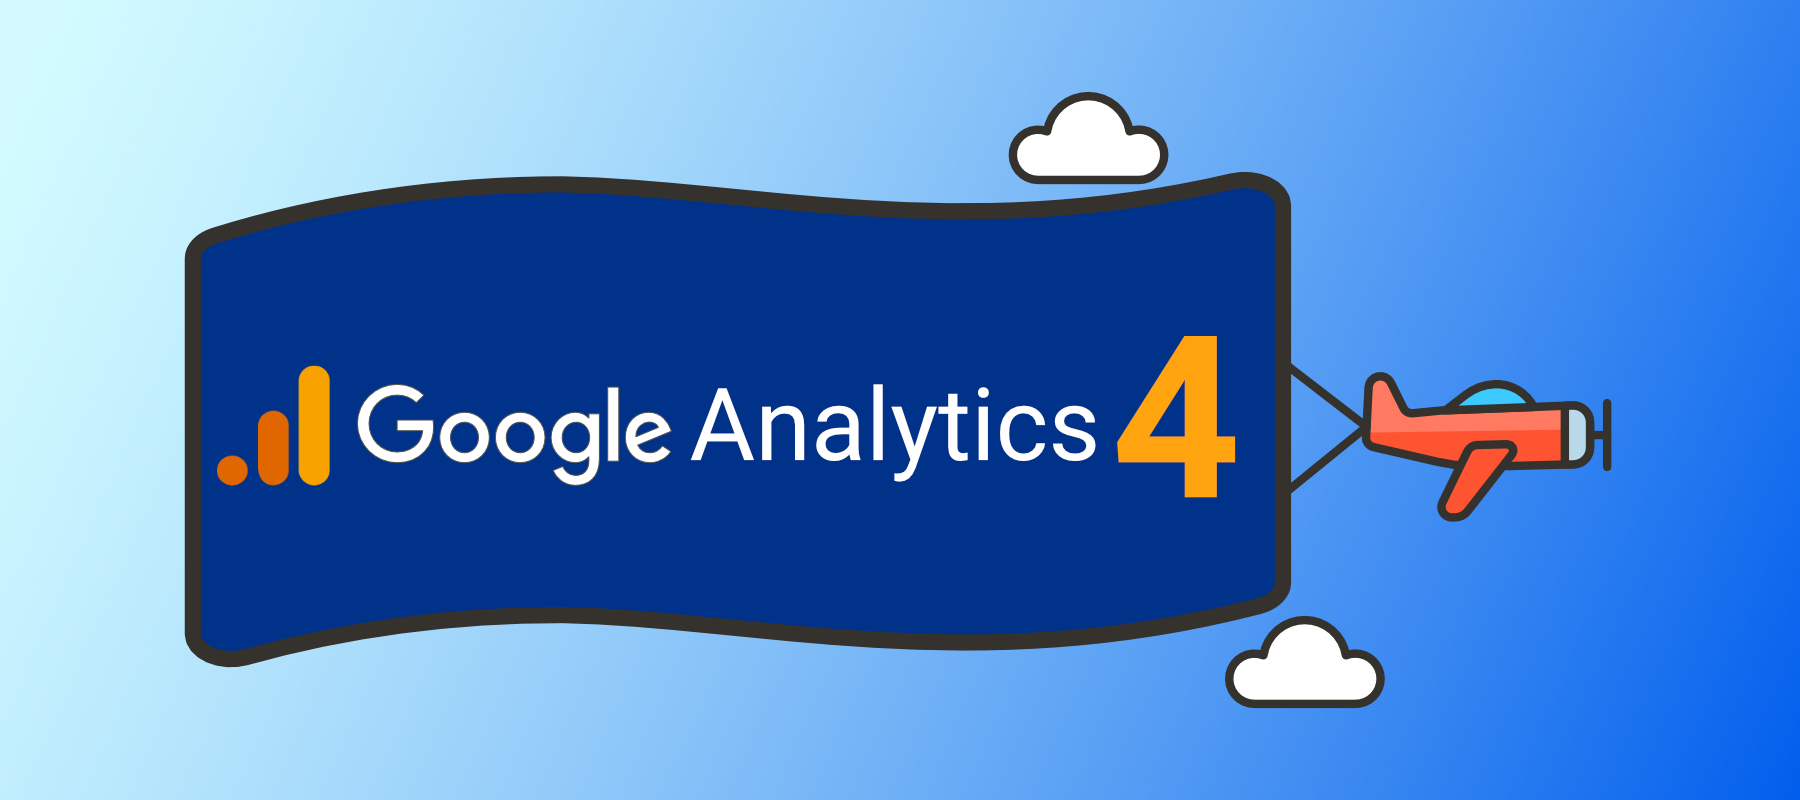 Google Analytics 4 – Brief Introduction And Vision